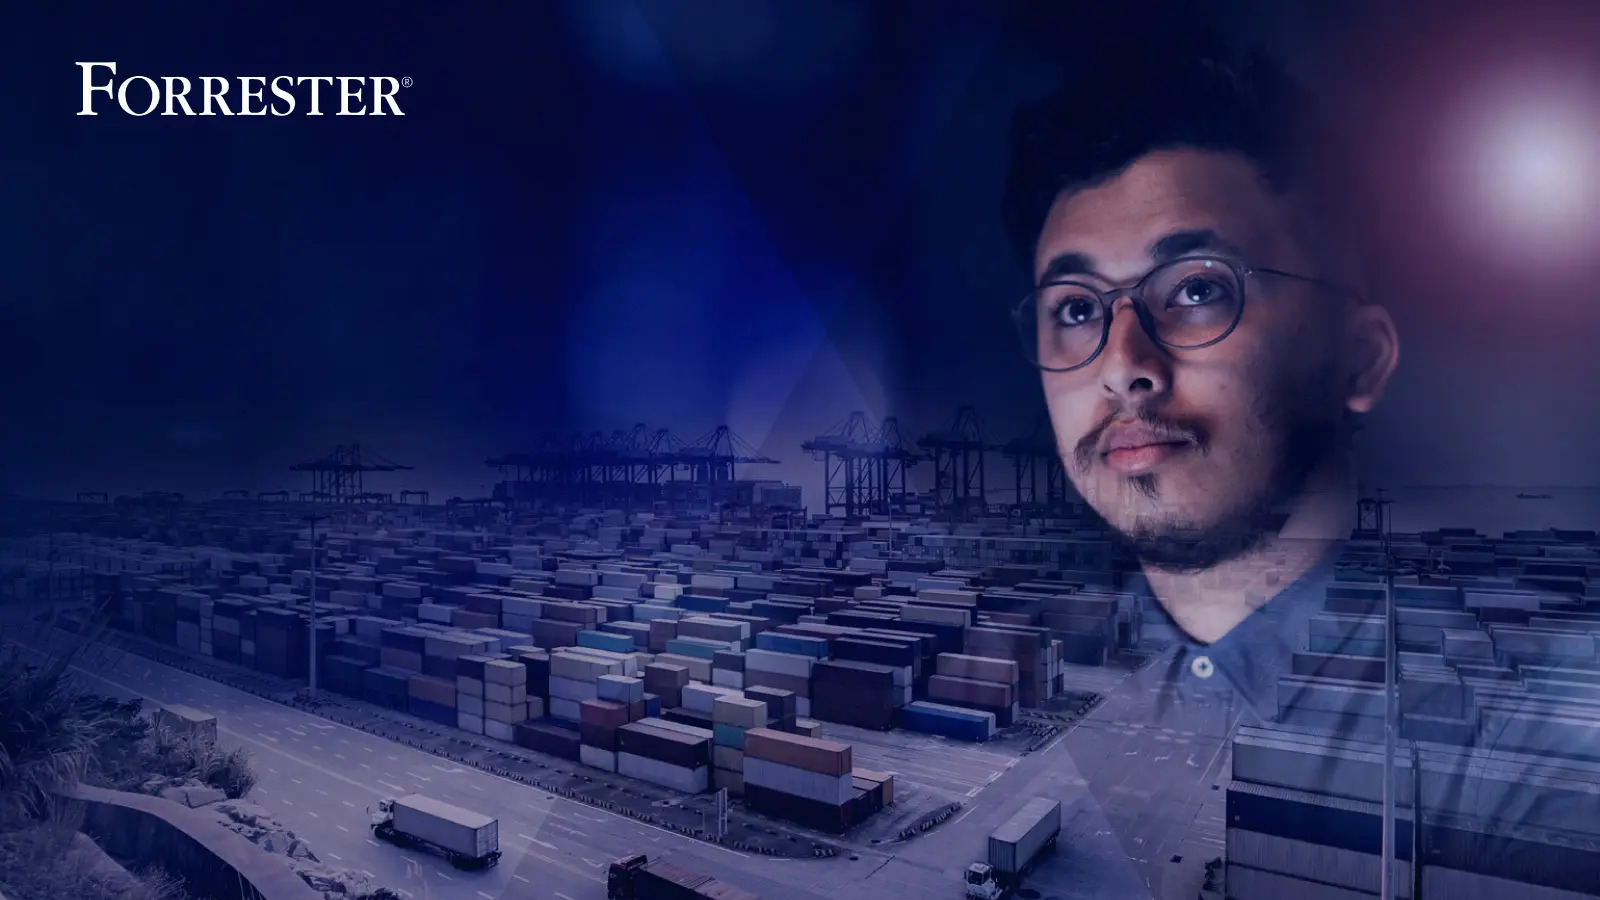 Man with glasses overlooking a shipping yard